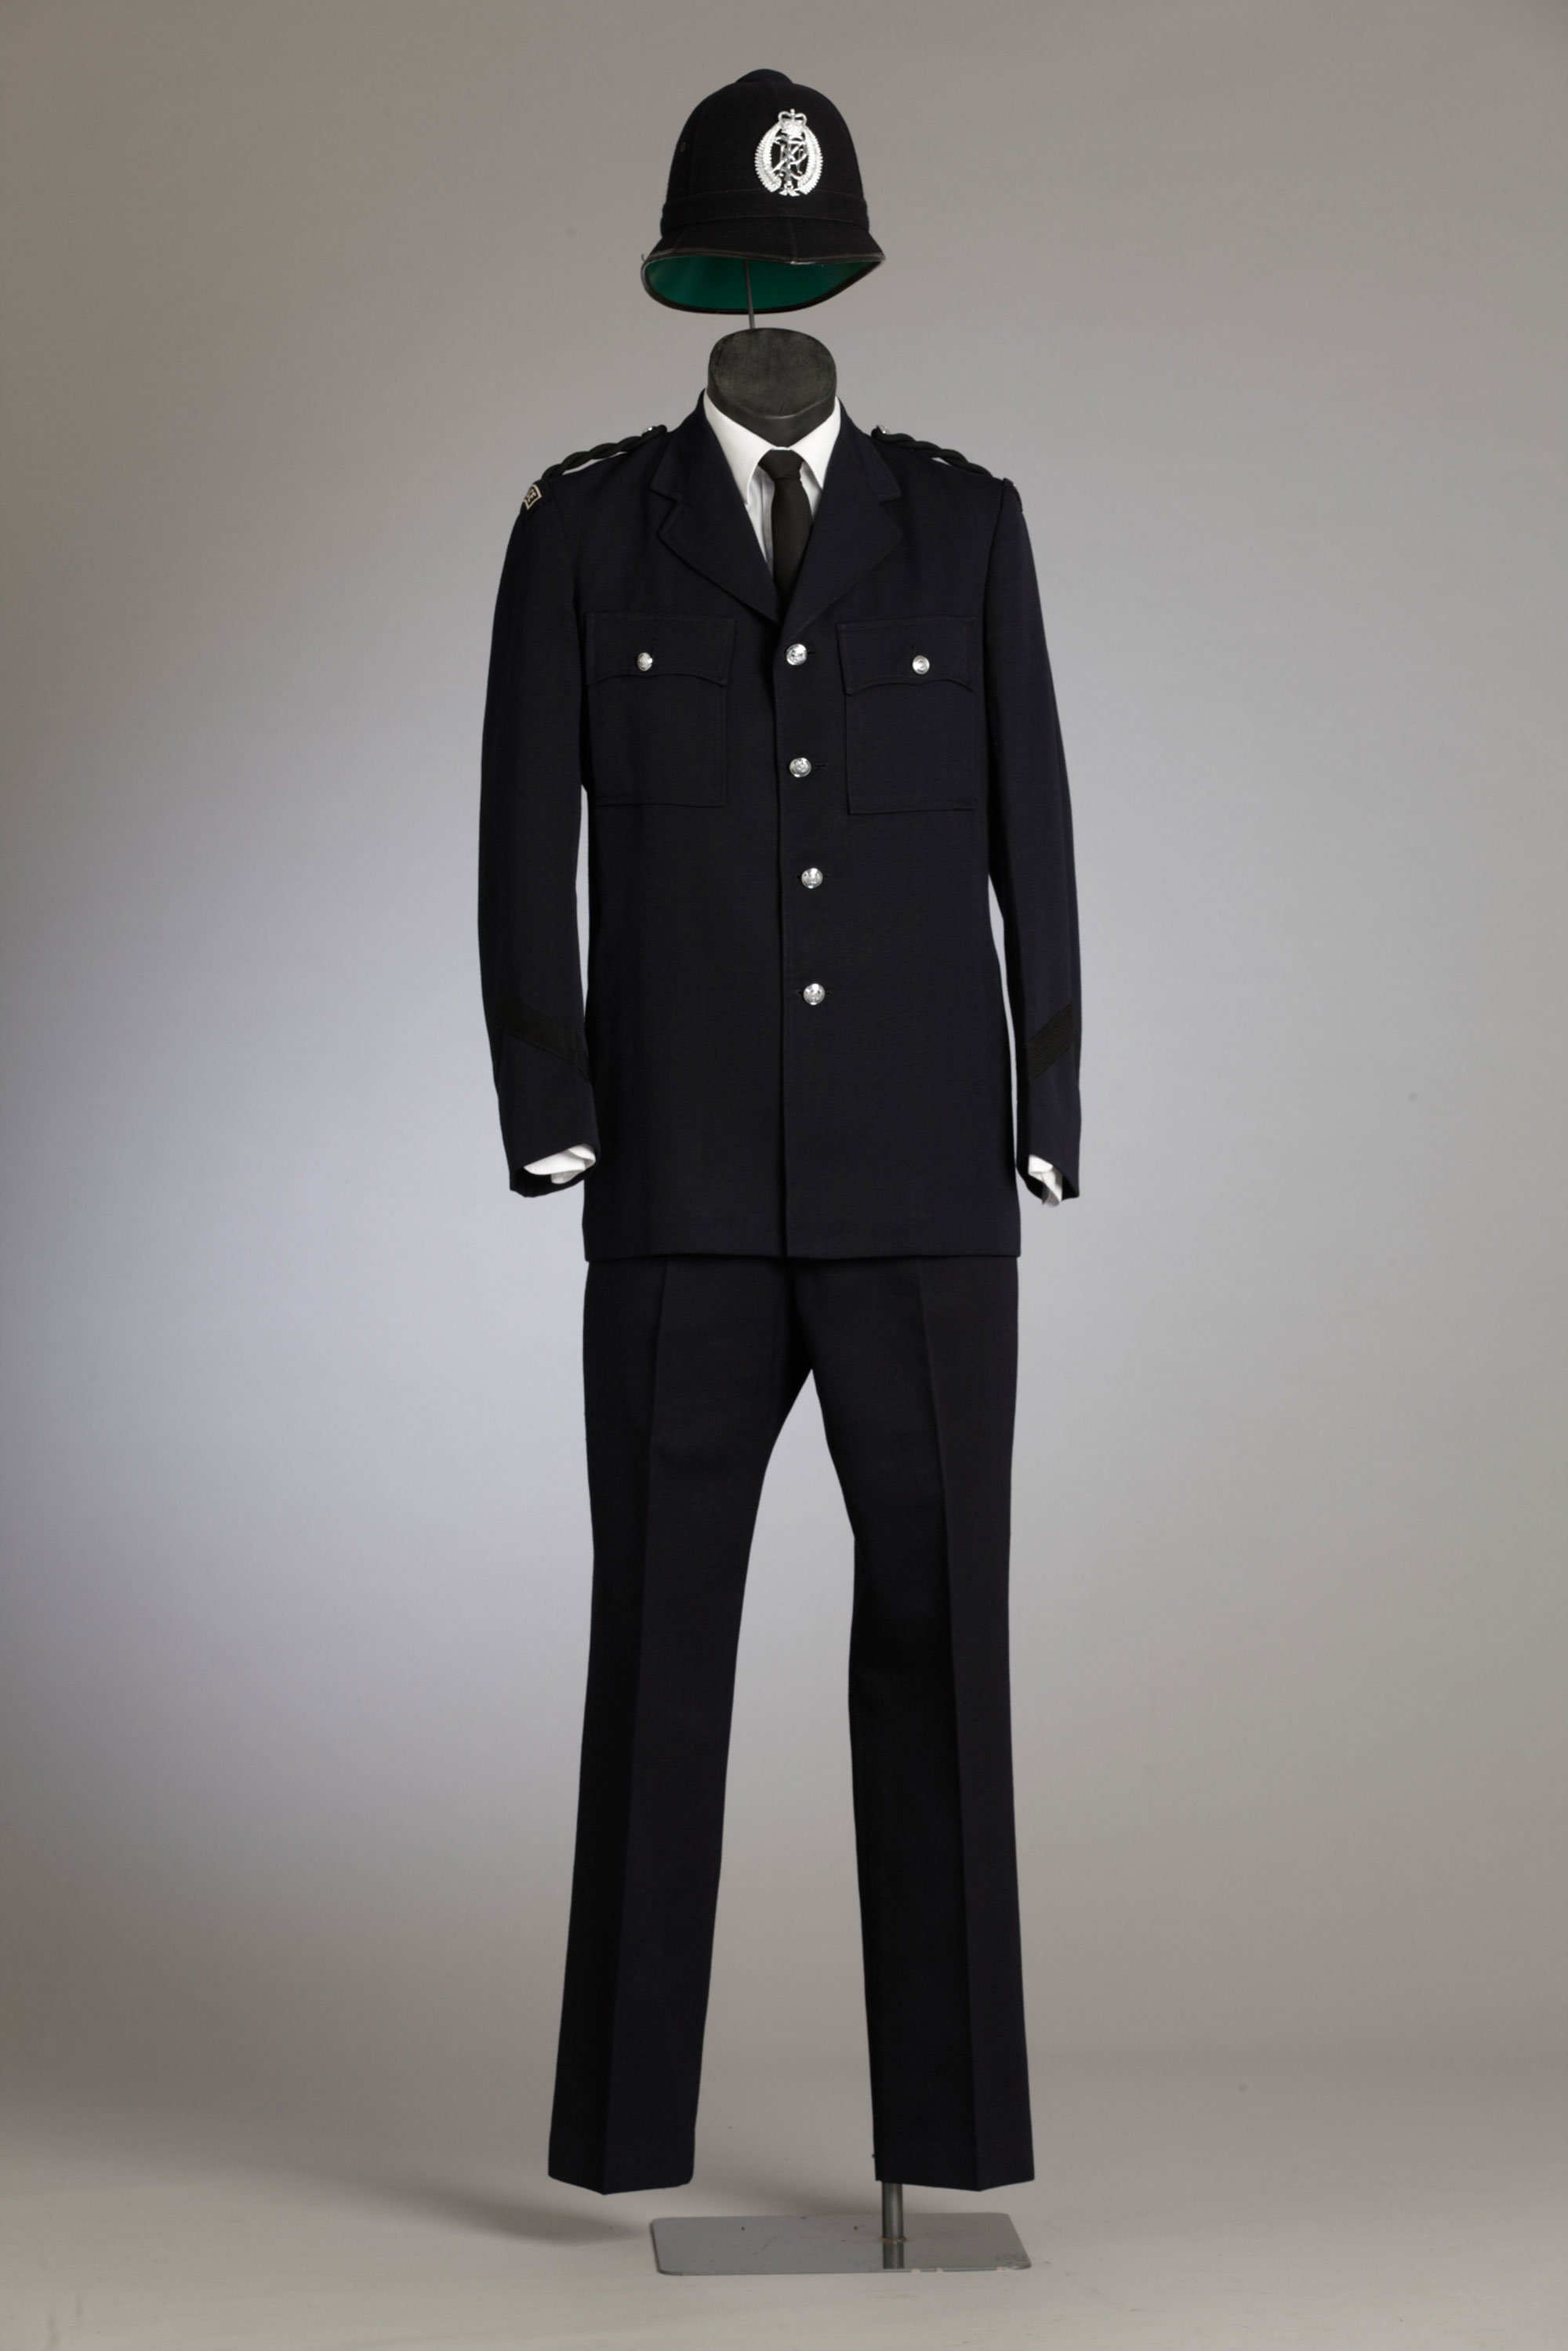 What are the different police uniforms used in different 